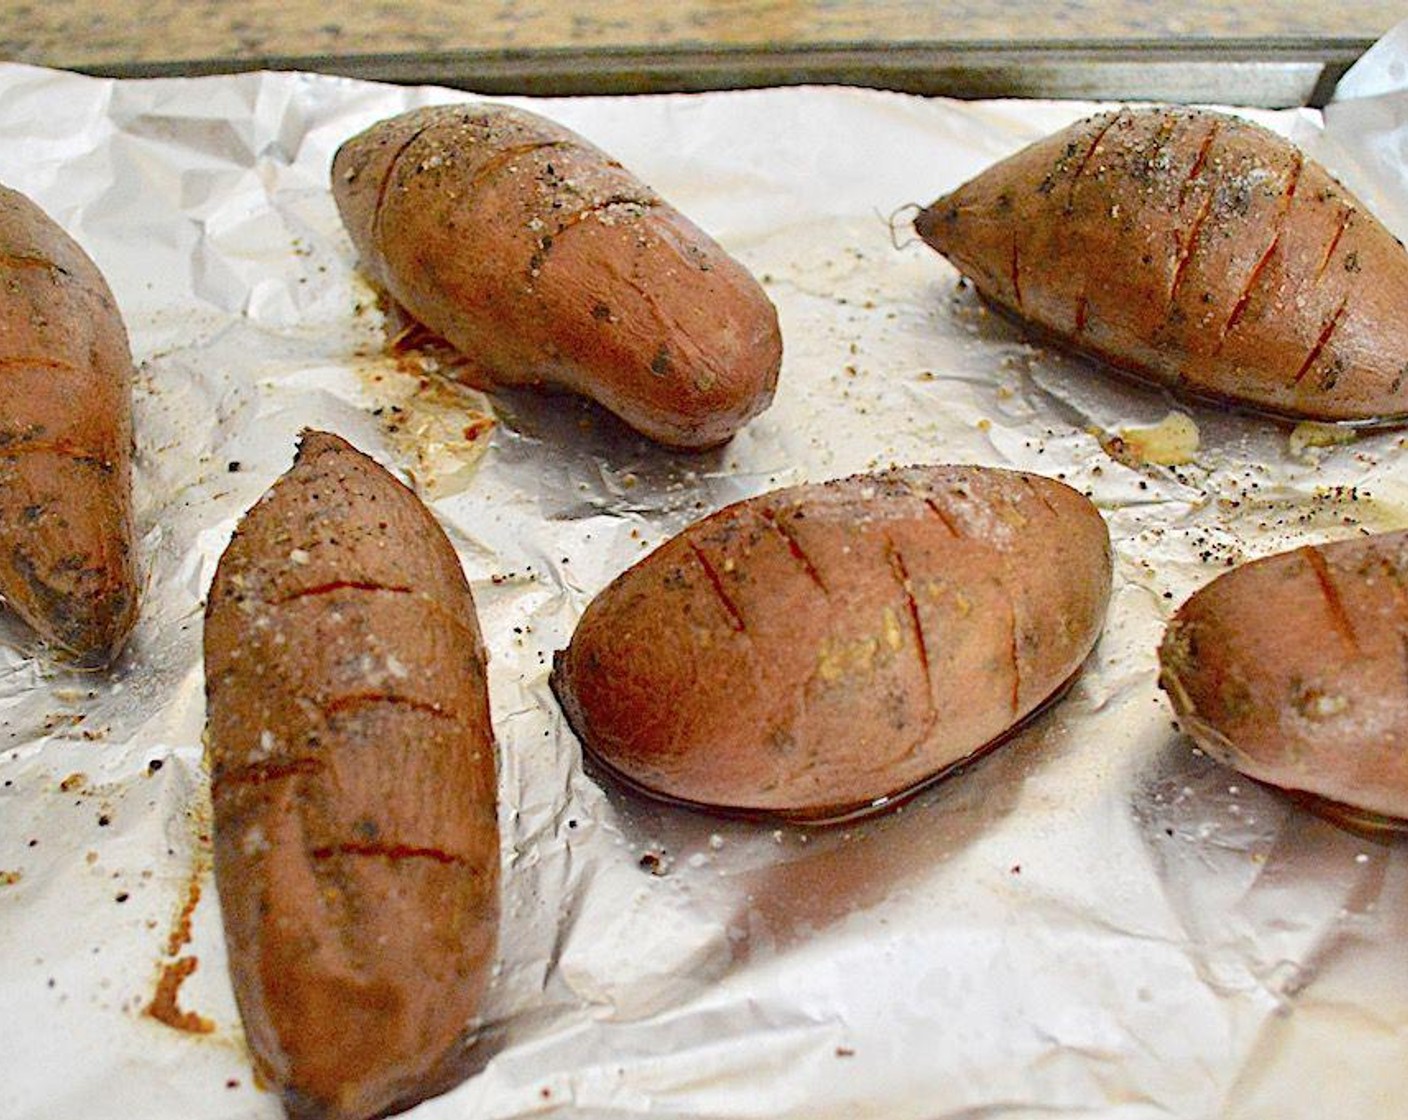 step 2 Slice the Sweet Potatoes (6) all over with a knife to ventilate them and allow the oil and seasoning to seep through. Then drizzle them all generously with Olive Oil (as needed) and sprinkle liberally with Salt (to taste) and Ground Black Pepper (to taste). Roast them until tender for about 40 minutes, then let them cool enough to handle.